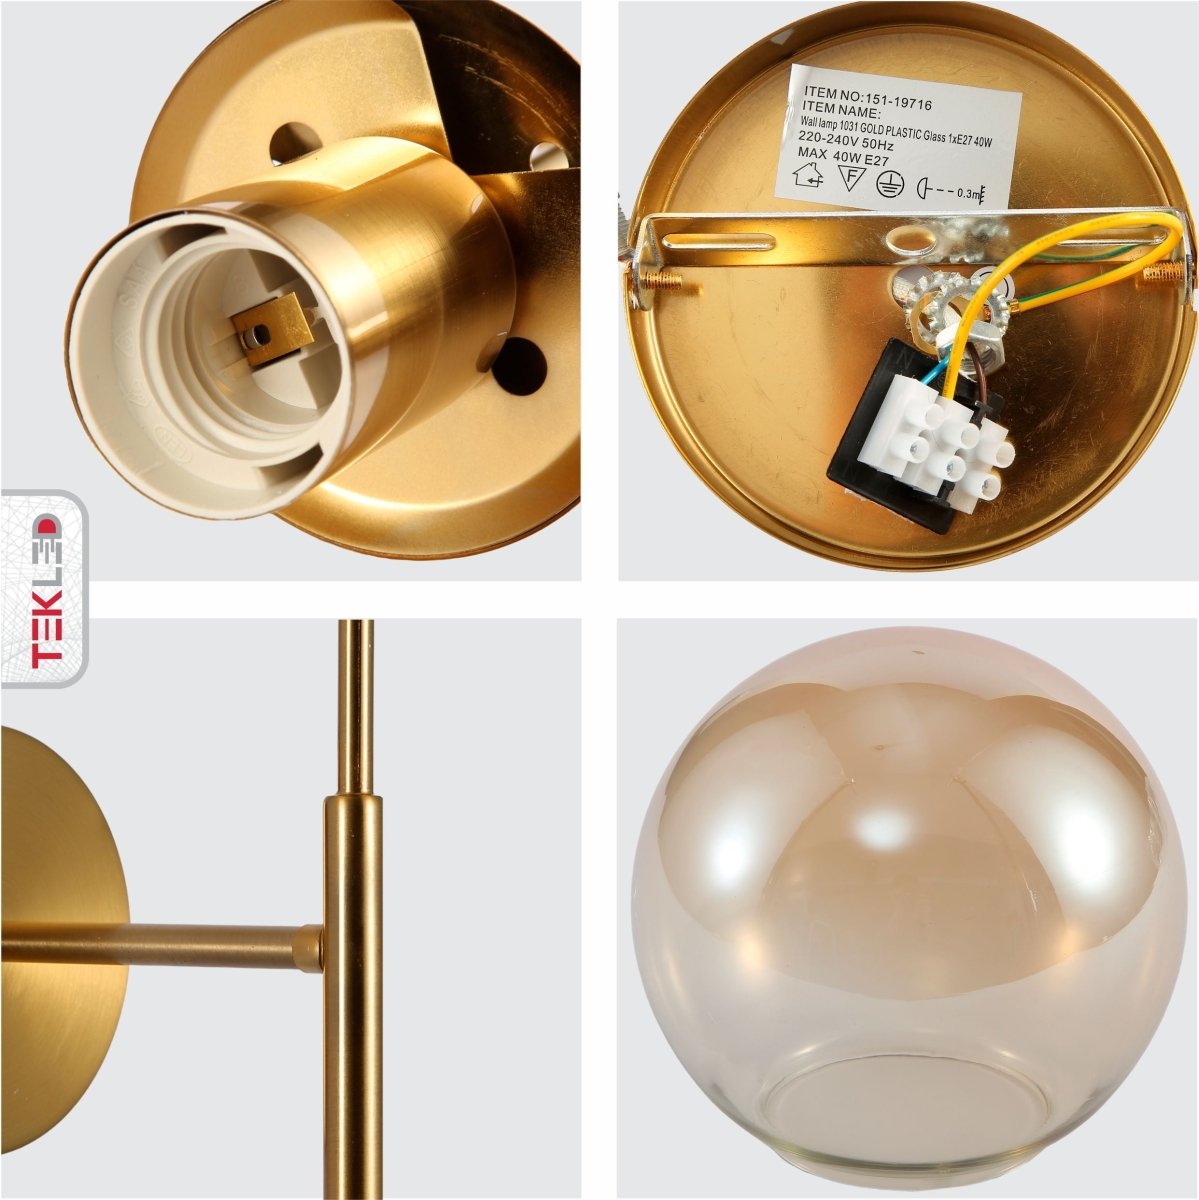 Detailed shots of Amber Glass Gold Metal Wall Light with E27 Fitting | TEKLED 151-19716